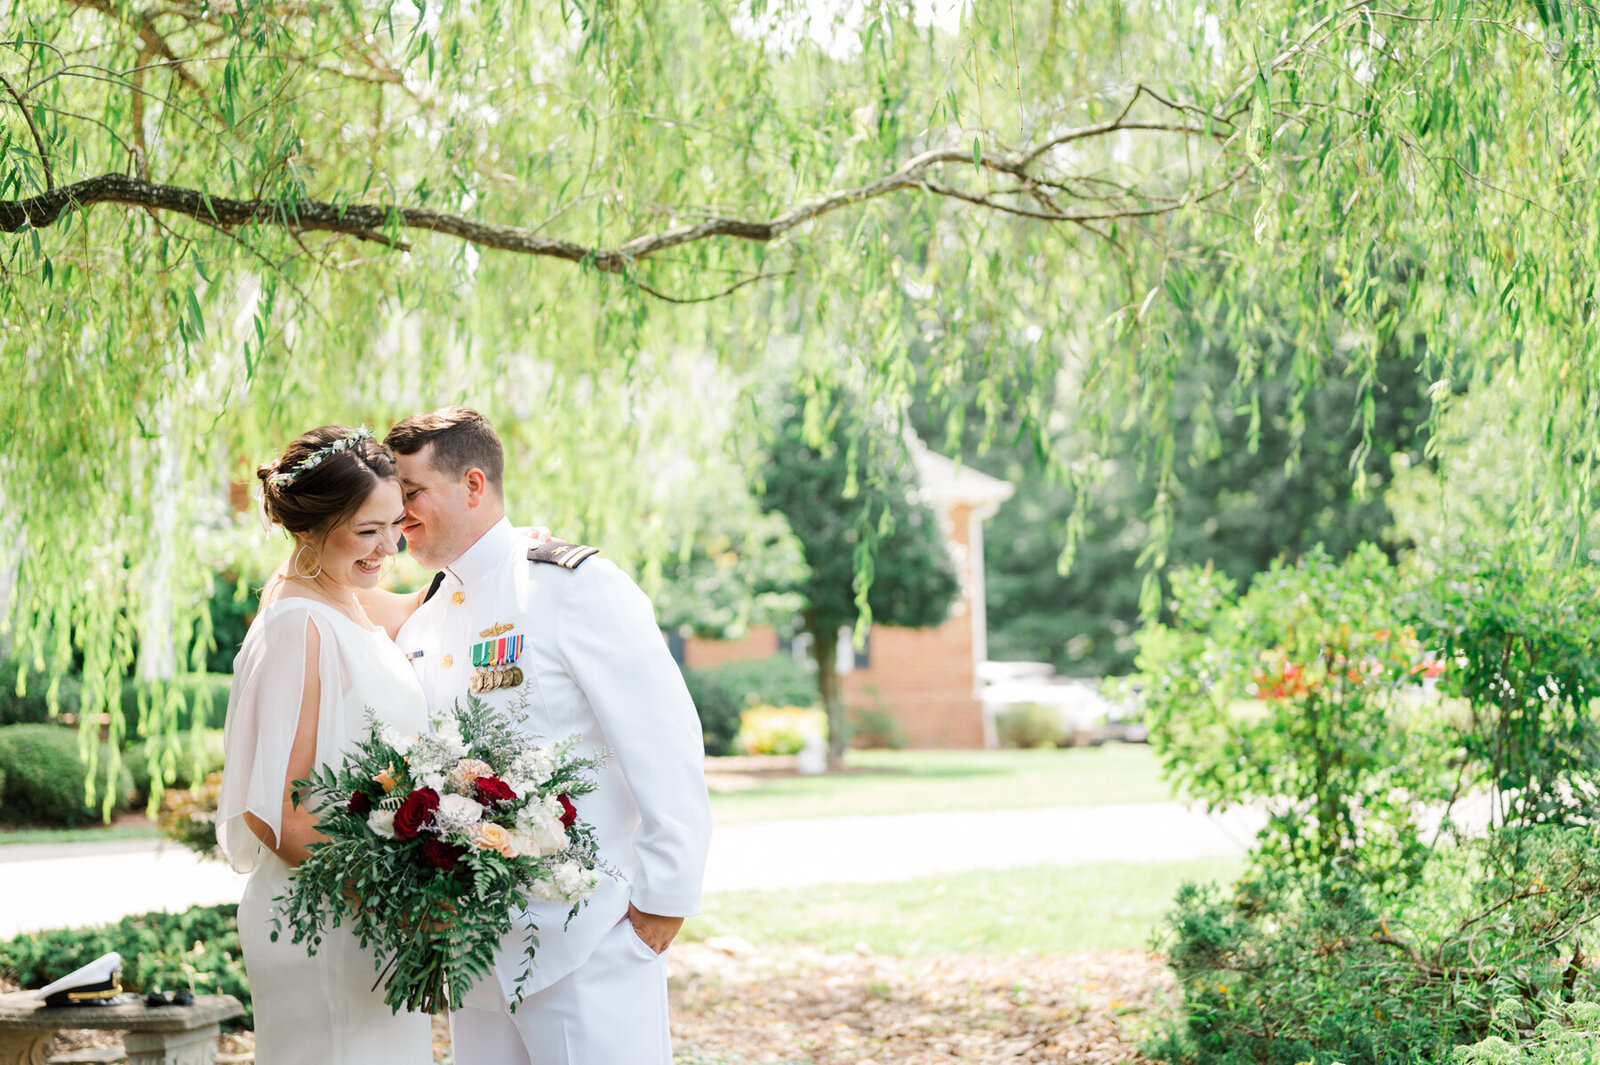 Wedding photography portrait of couple in white dress and white Marine formal apparel posing under a willow tree in Augusta County Virginia.